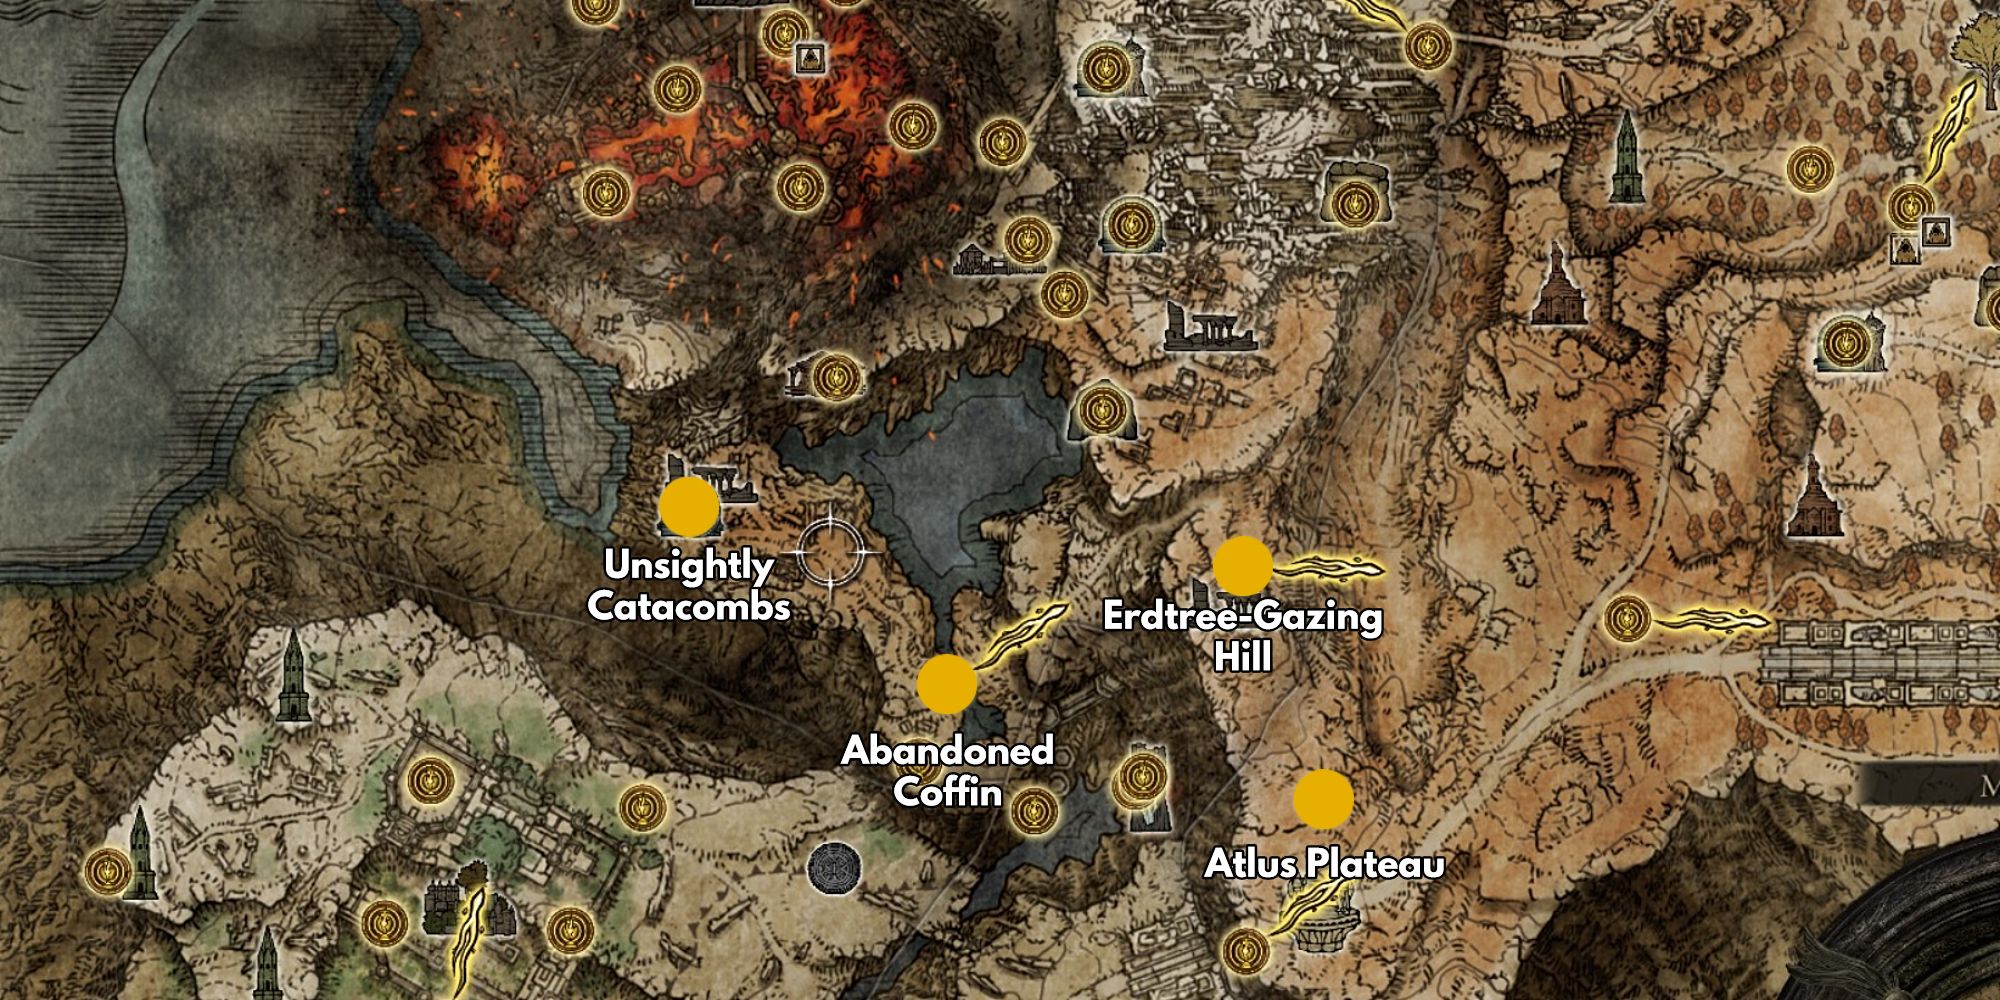 elden ring map location to get to unsightly catacombs